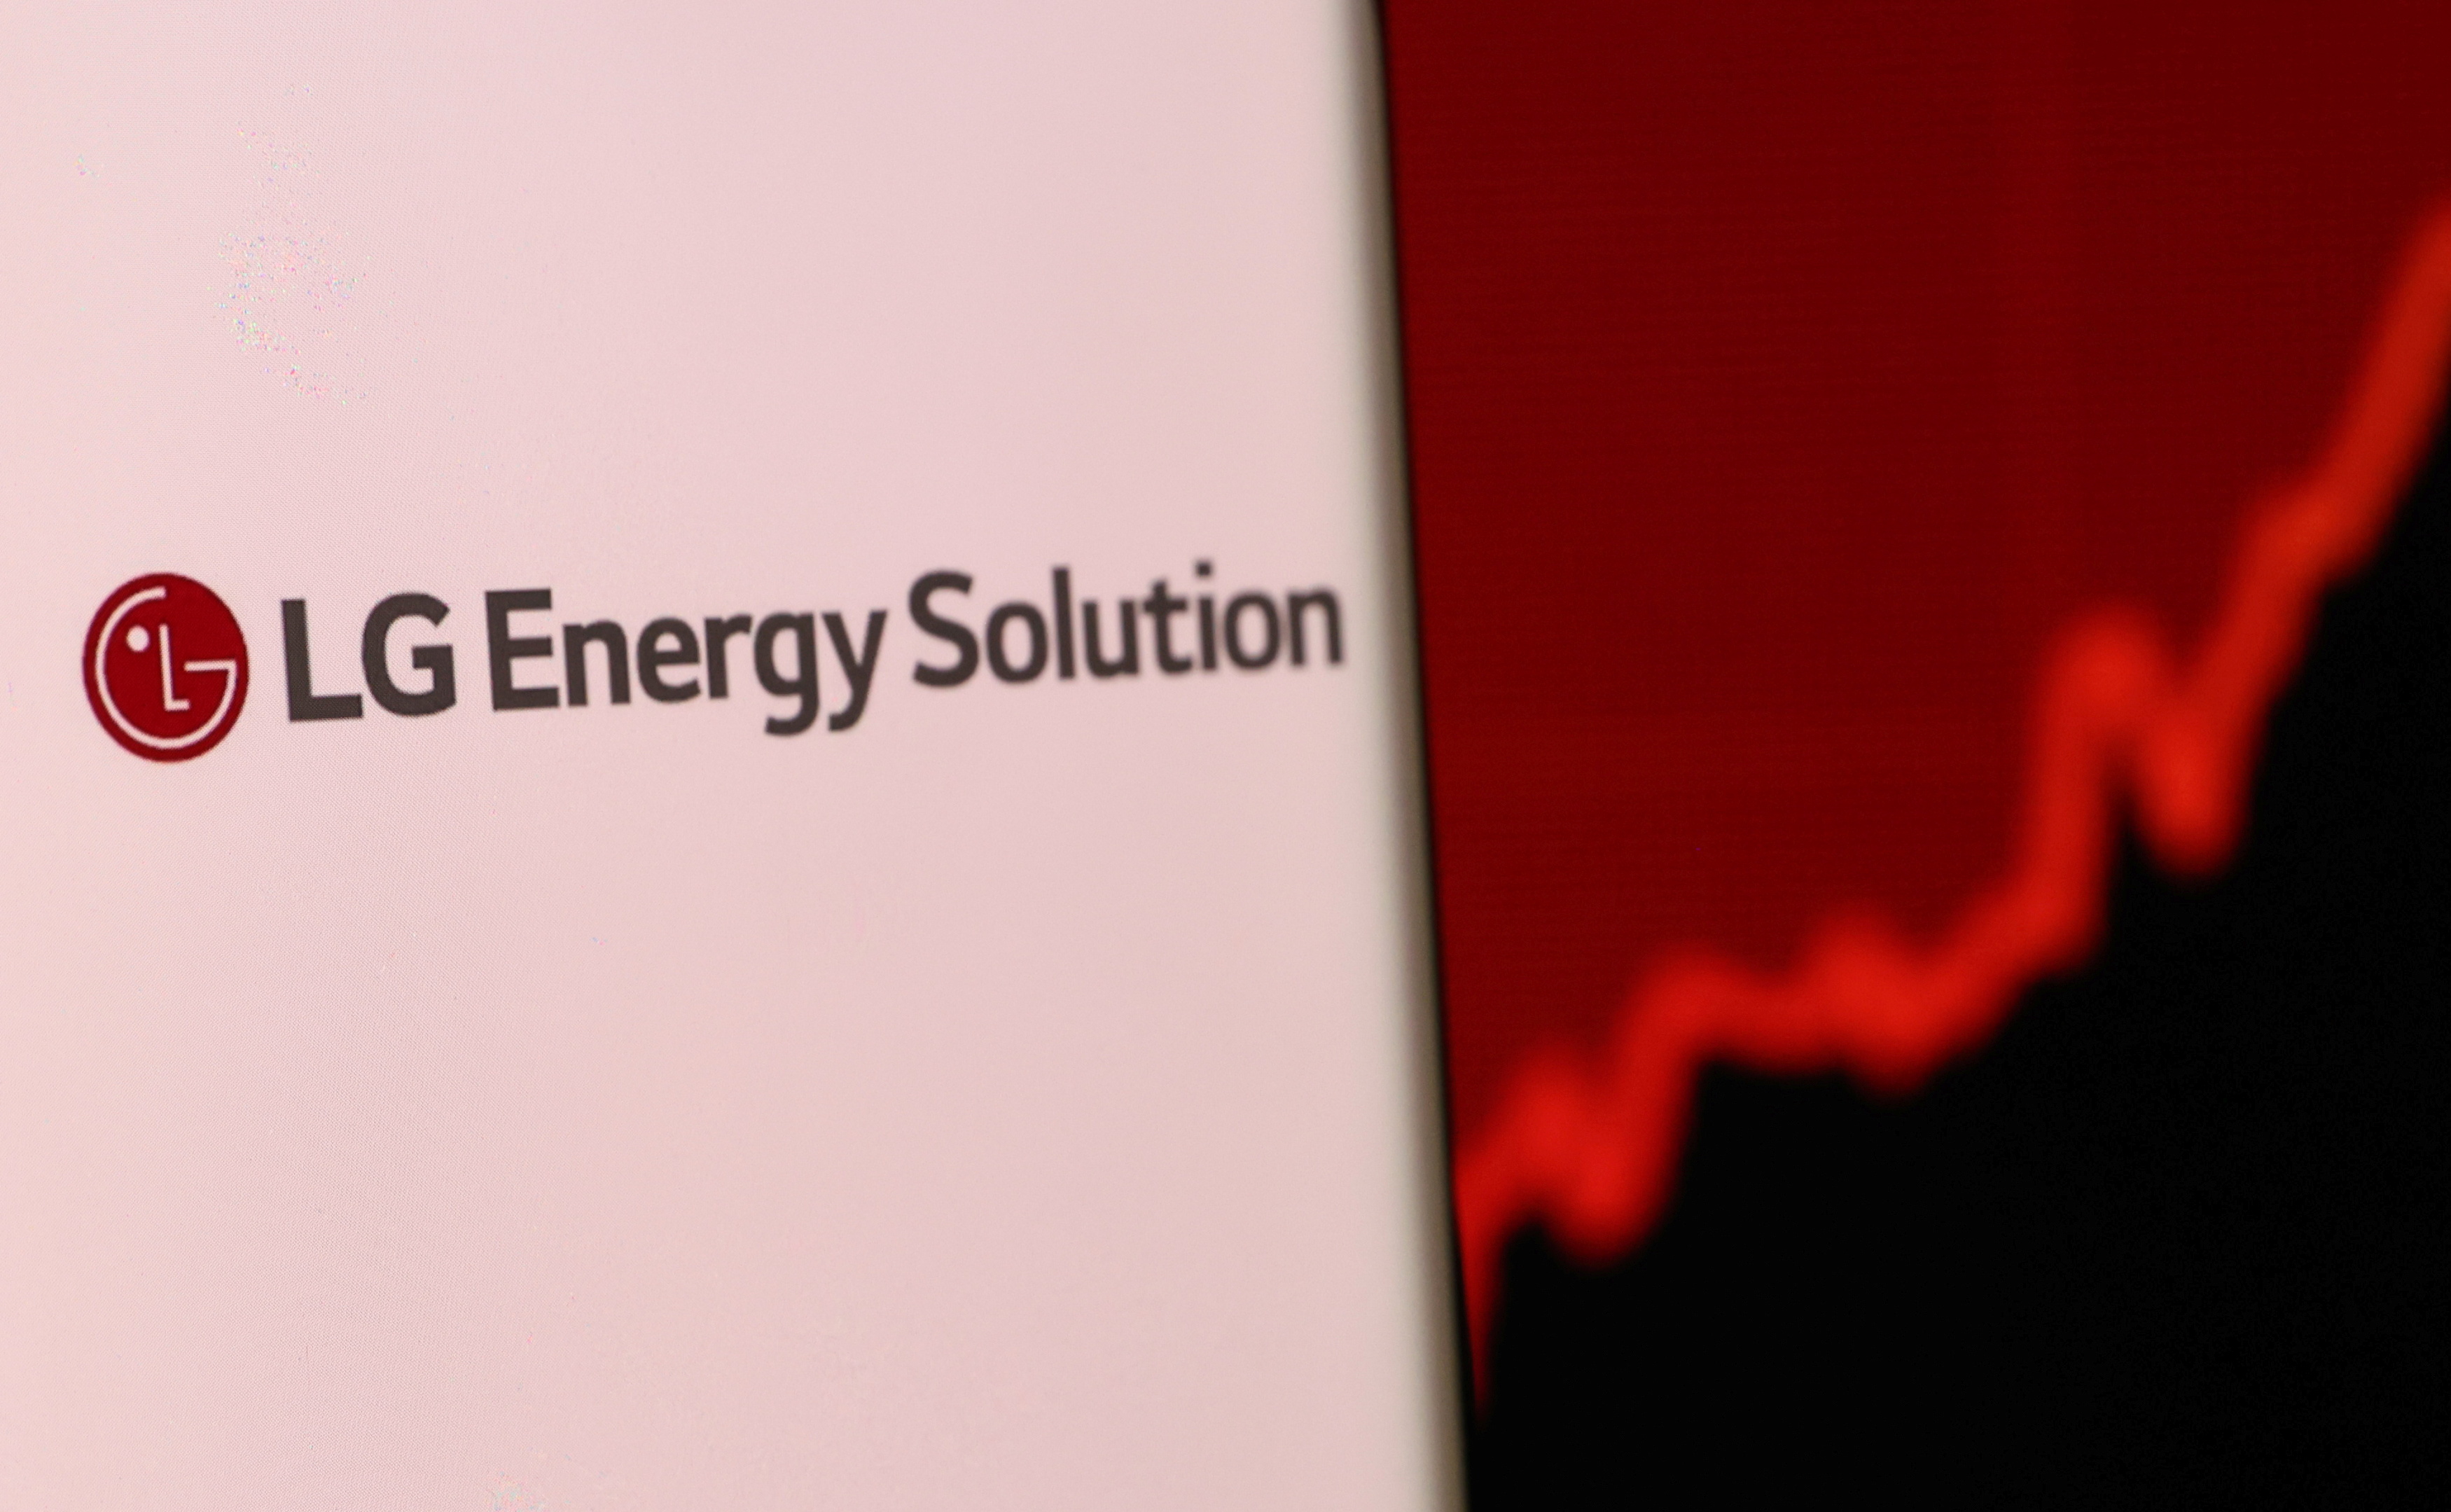 Illustration shows smartphone with LG Energy Solution's logo displayed